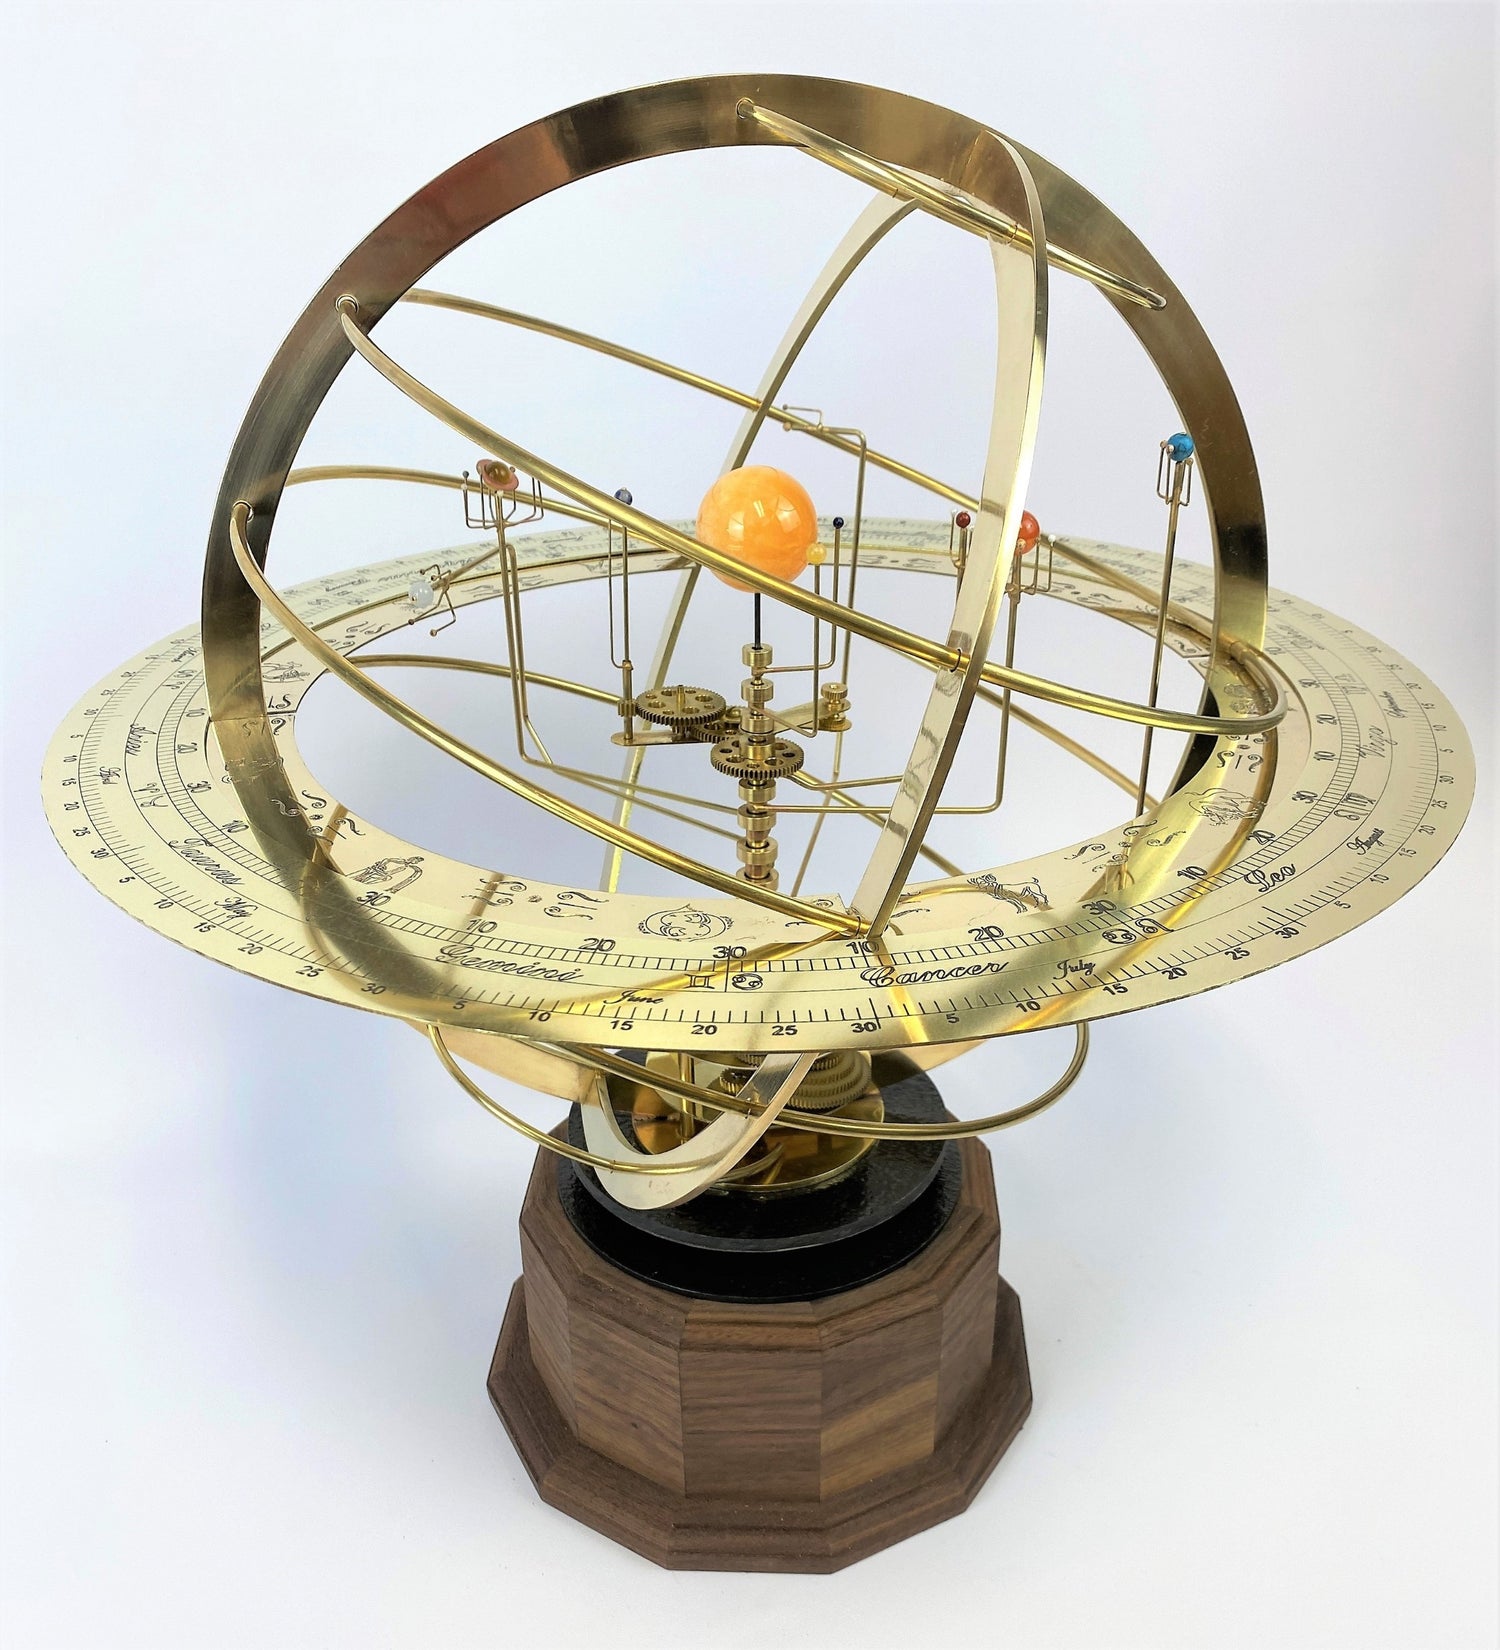 Tower Orrery on solid walnut base with semi-precious stone planets and full armillary sphere from Science Art